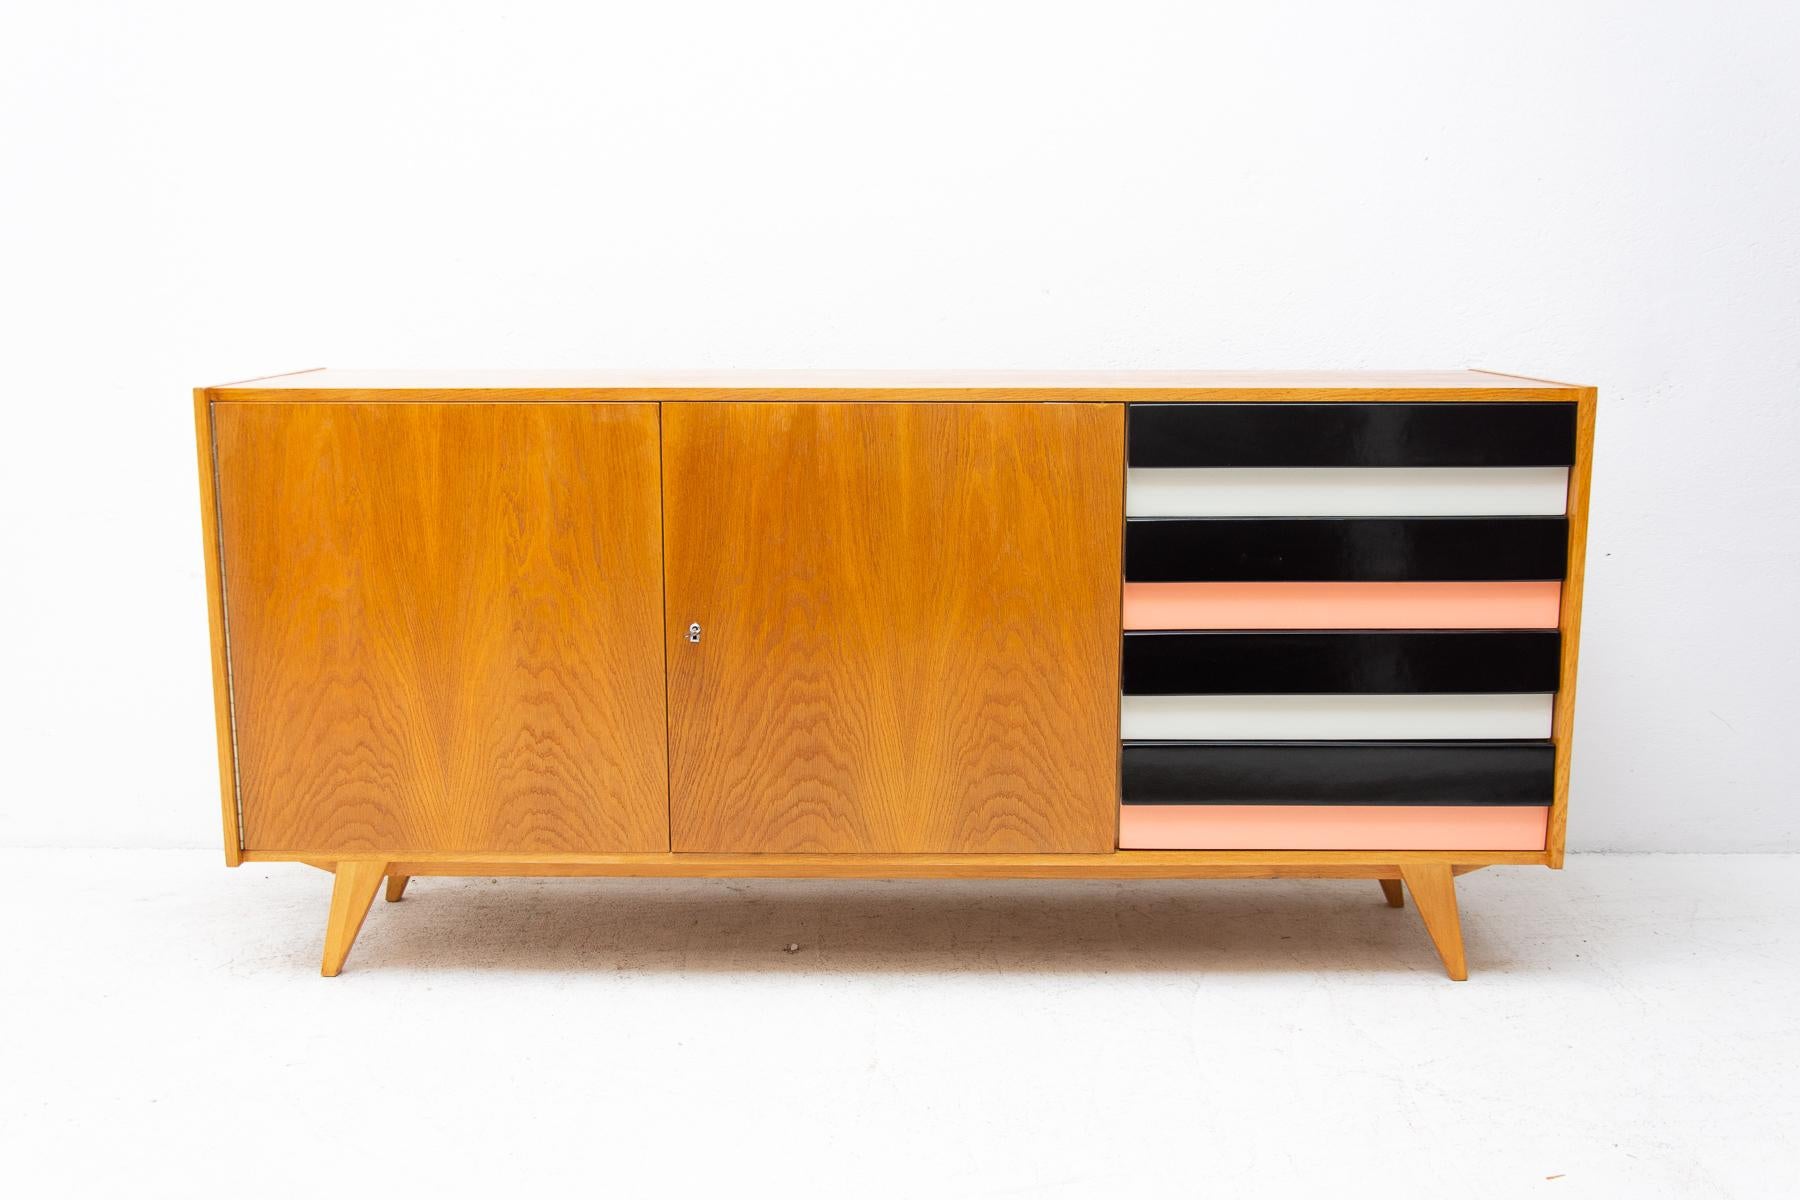 This Mid-Century Modernist sideboard no. U-460 was designed by the famous Czechoslovaka architect Jirí Jiroutek in 1958.
It was made in the former Czechoslovakia for Interiér Praha in the 1960´s.
This model is associated with the world-famous EXPO